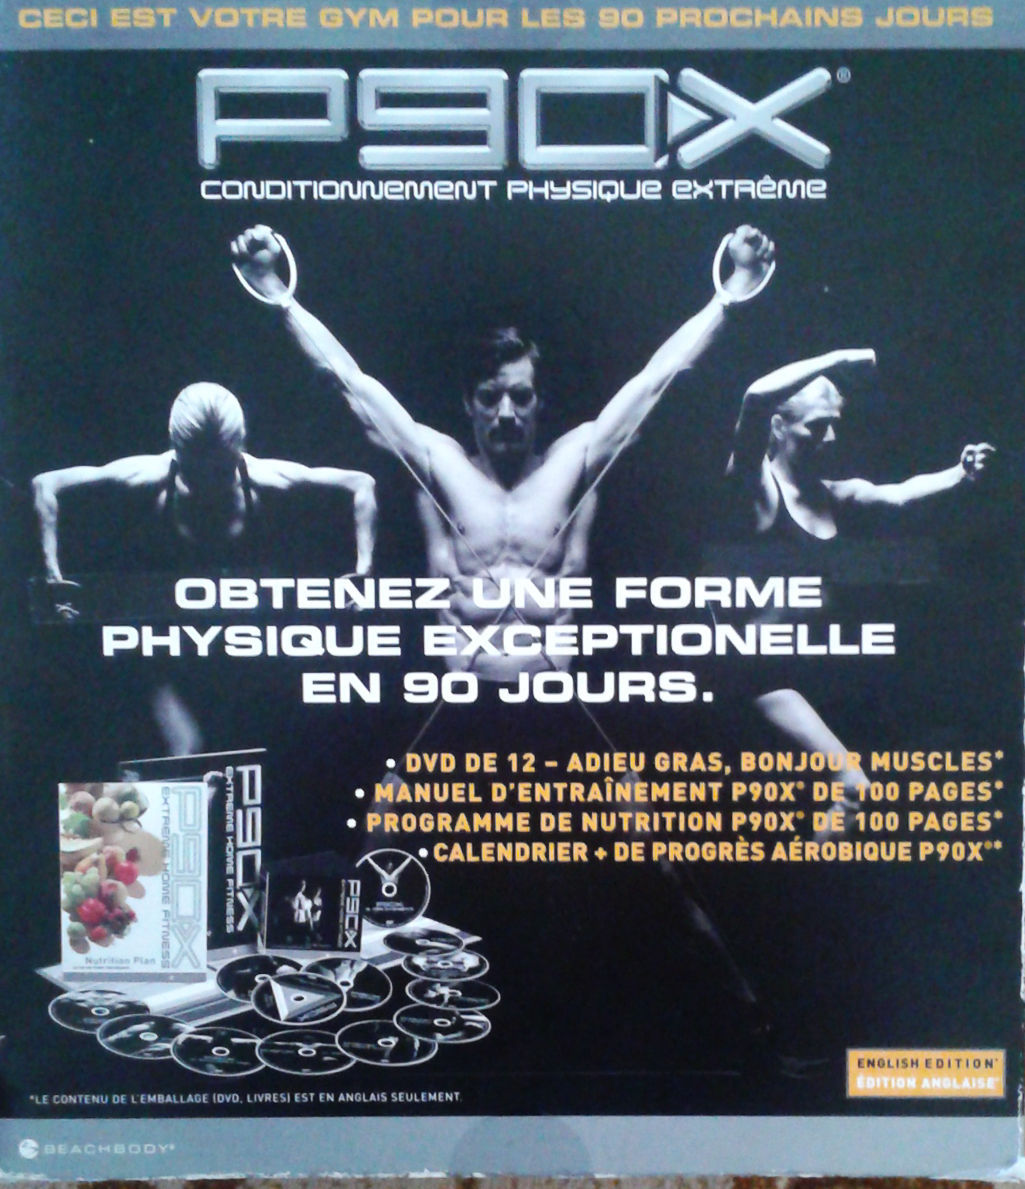 P90x Extreme Home Fitness DVD Set Nutrition and 50 similar items